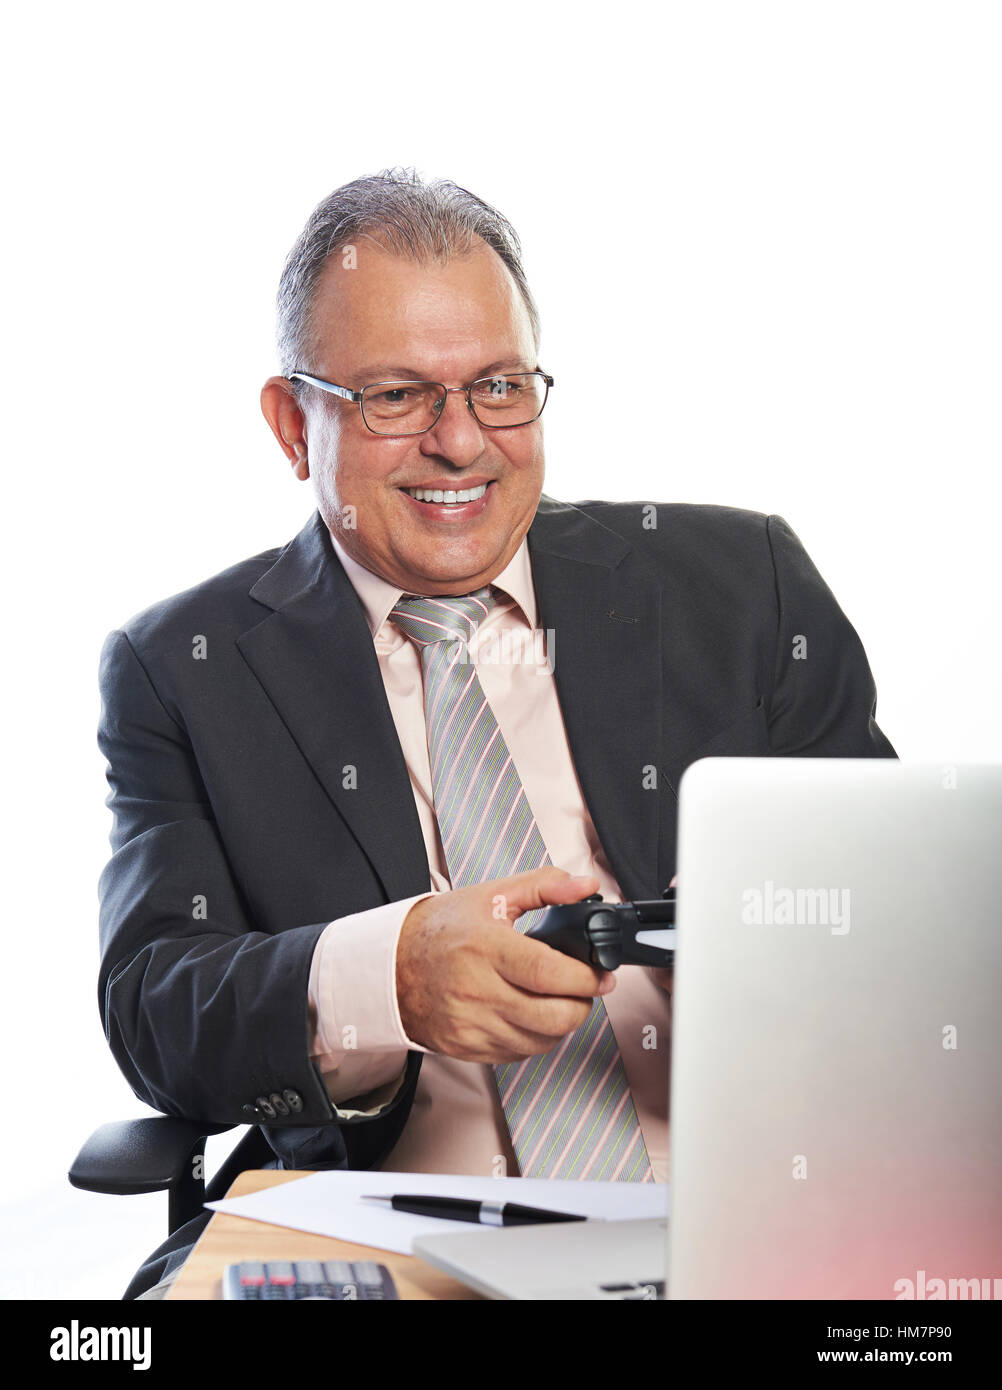 business man play games on working place isolated Stock Photo